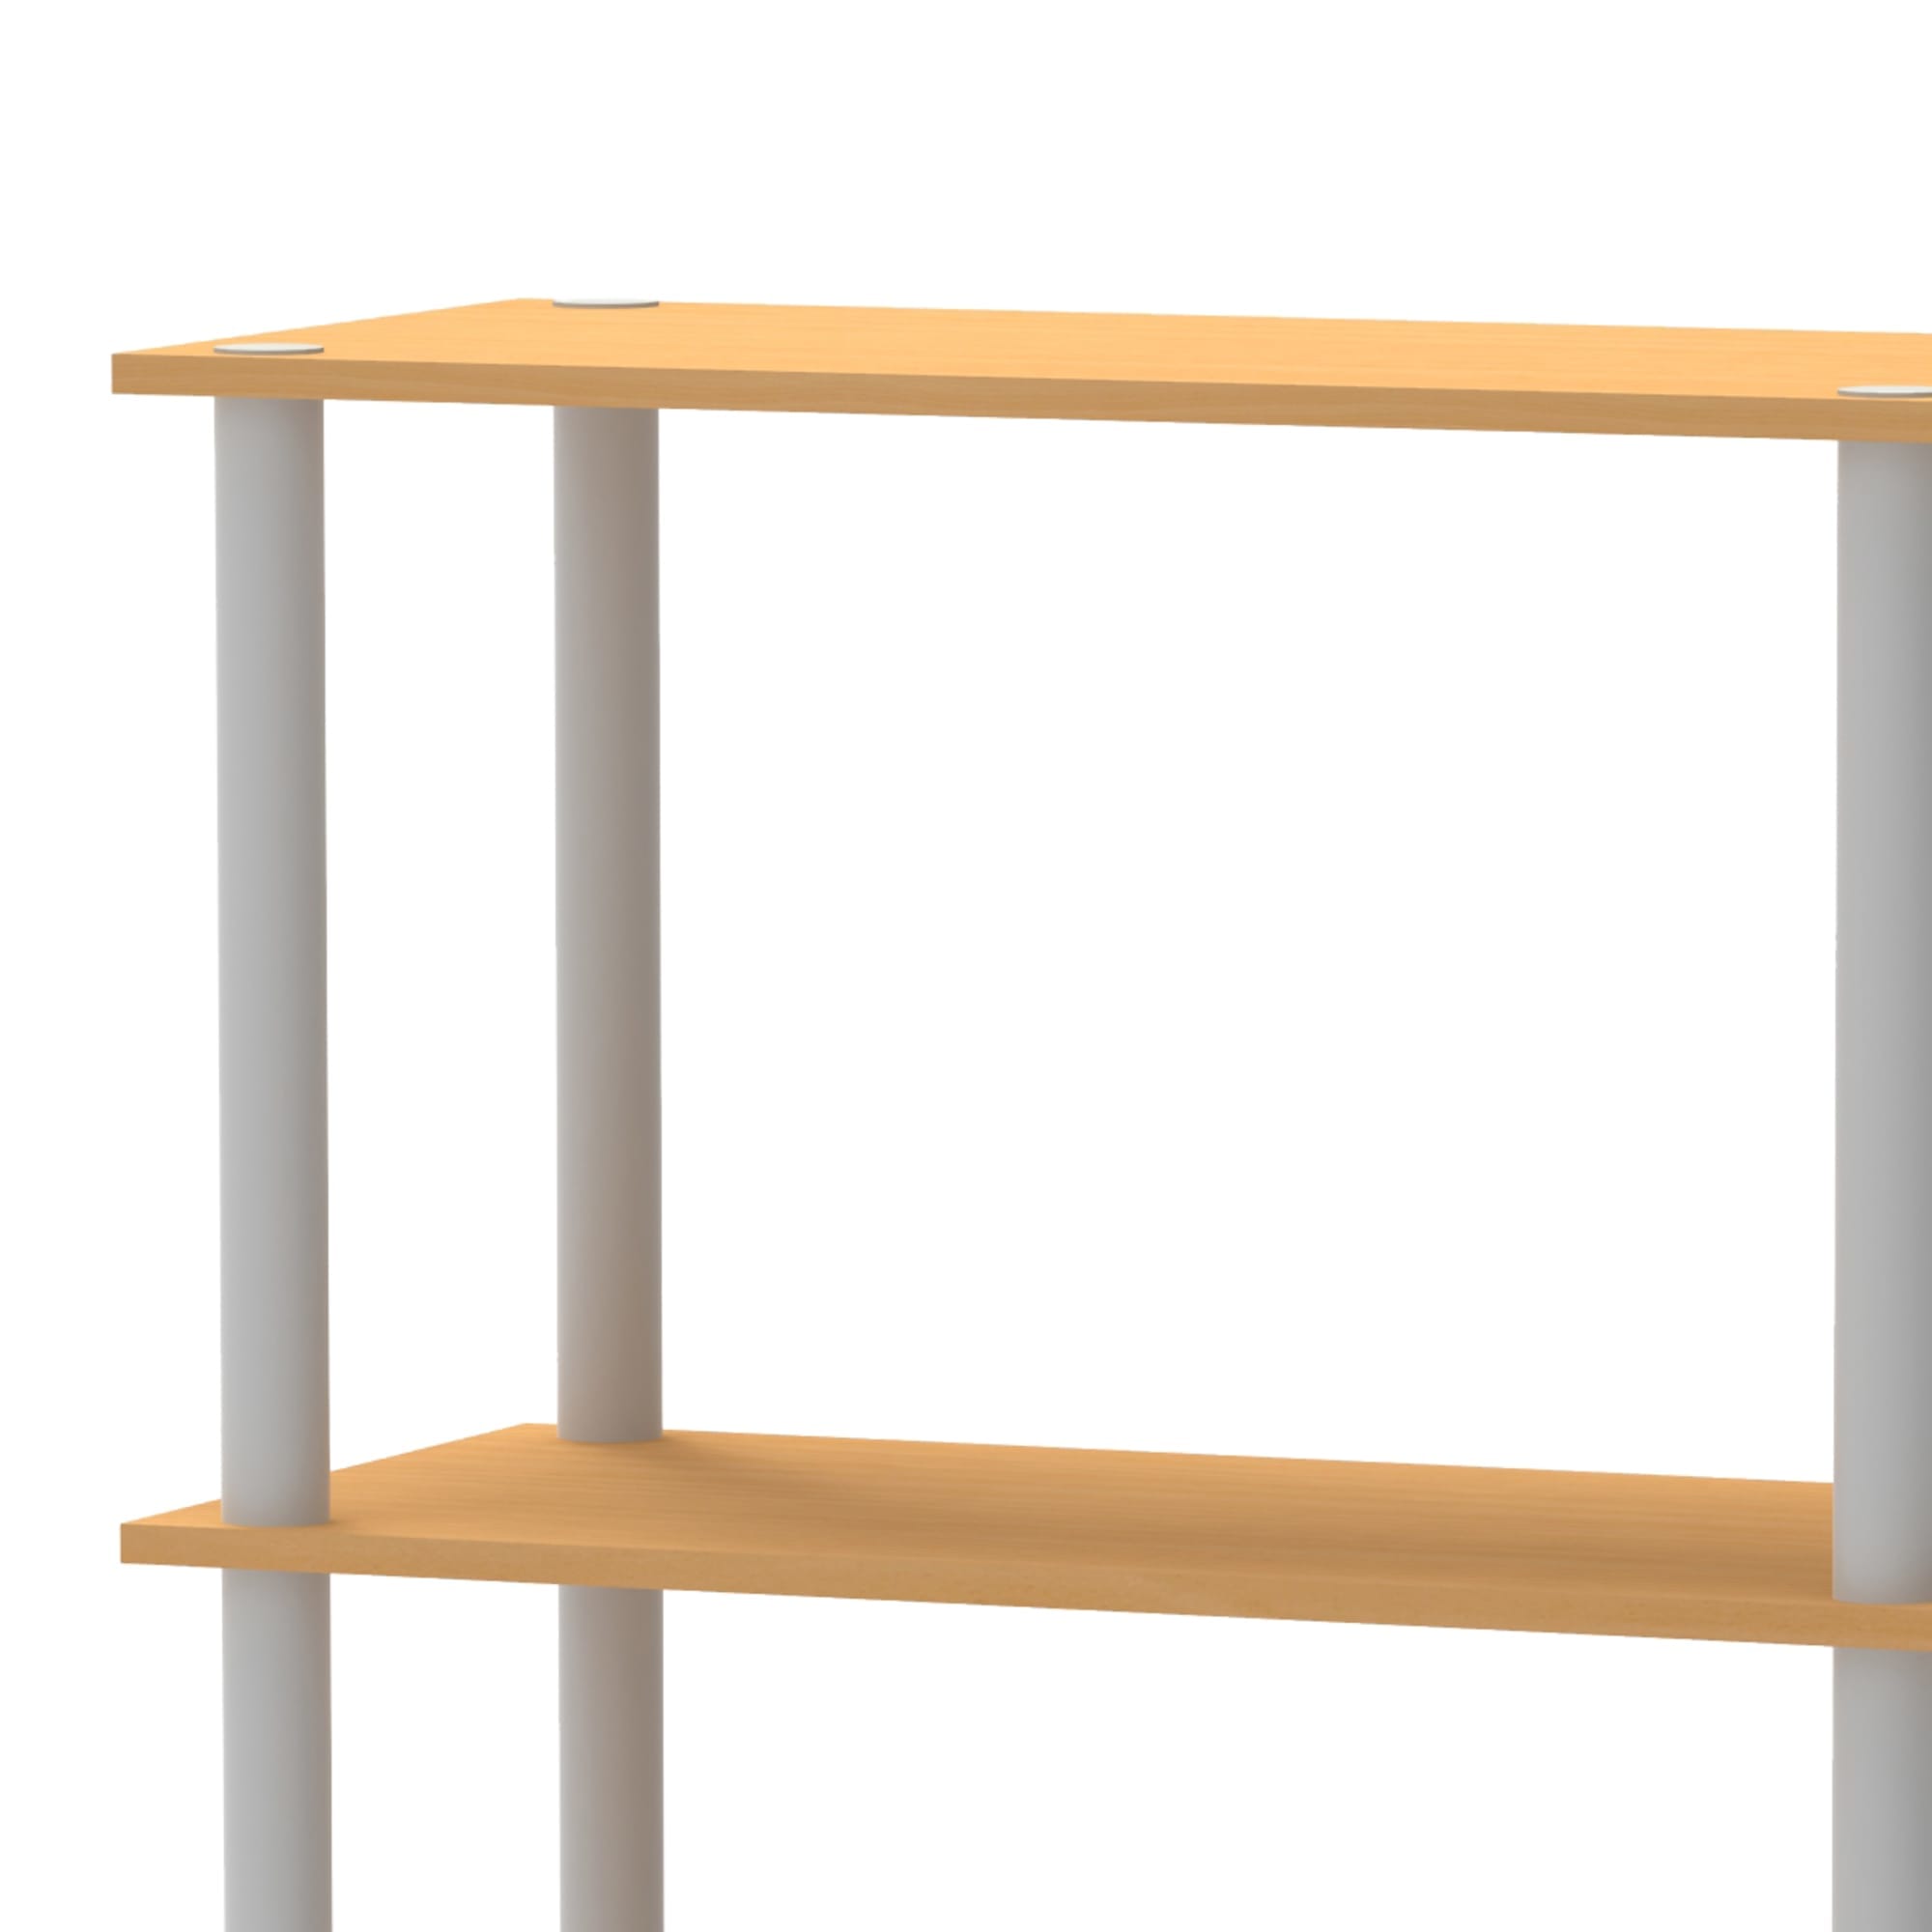 Home Basics 4 Tier Storage Shelf with Cabinet, Natural $40.00 EACH, CASE PACK OF 1